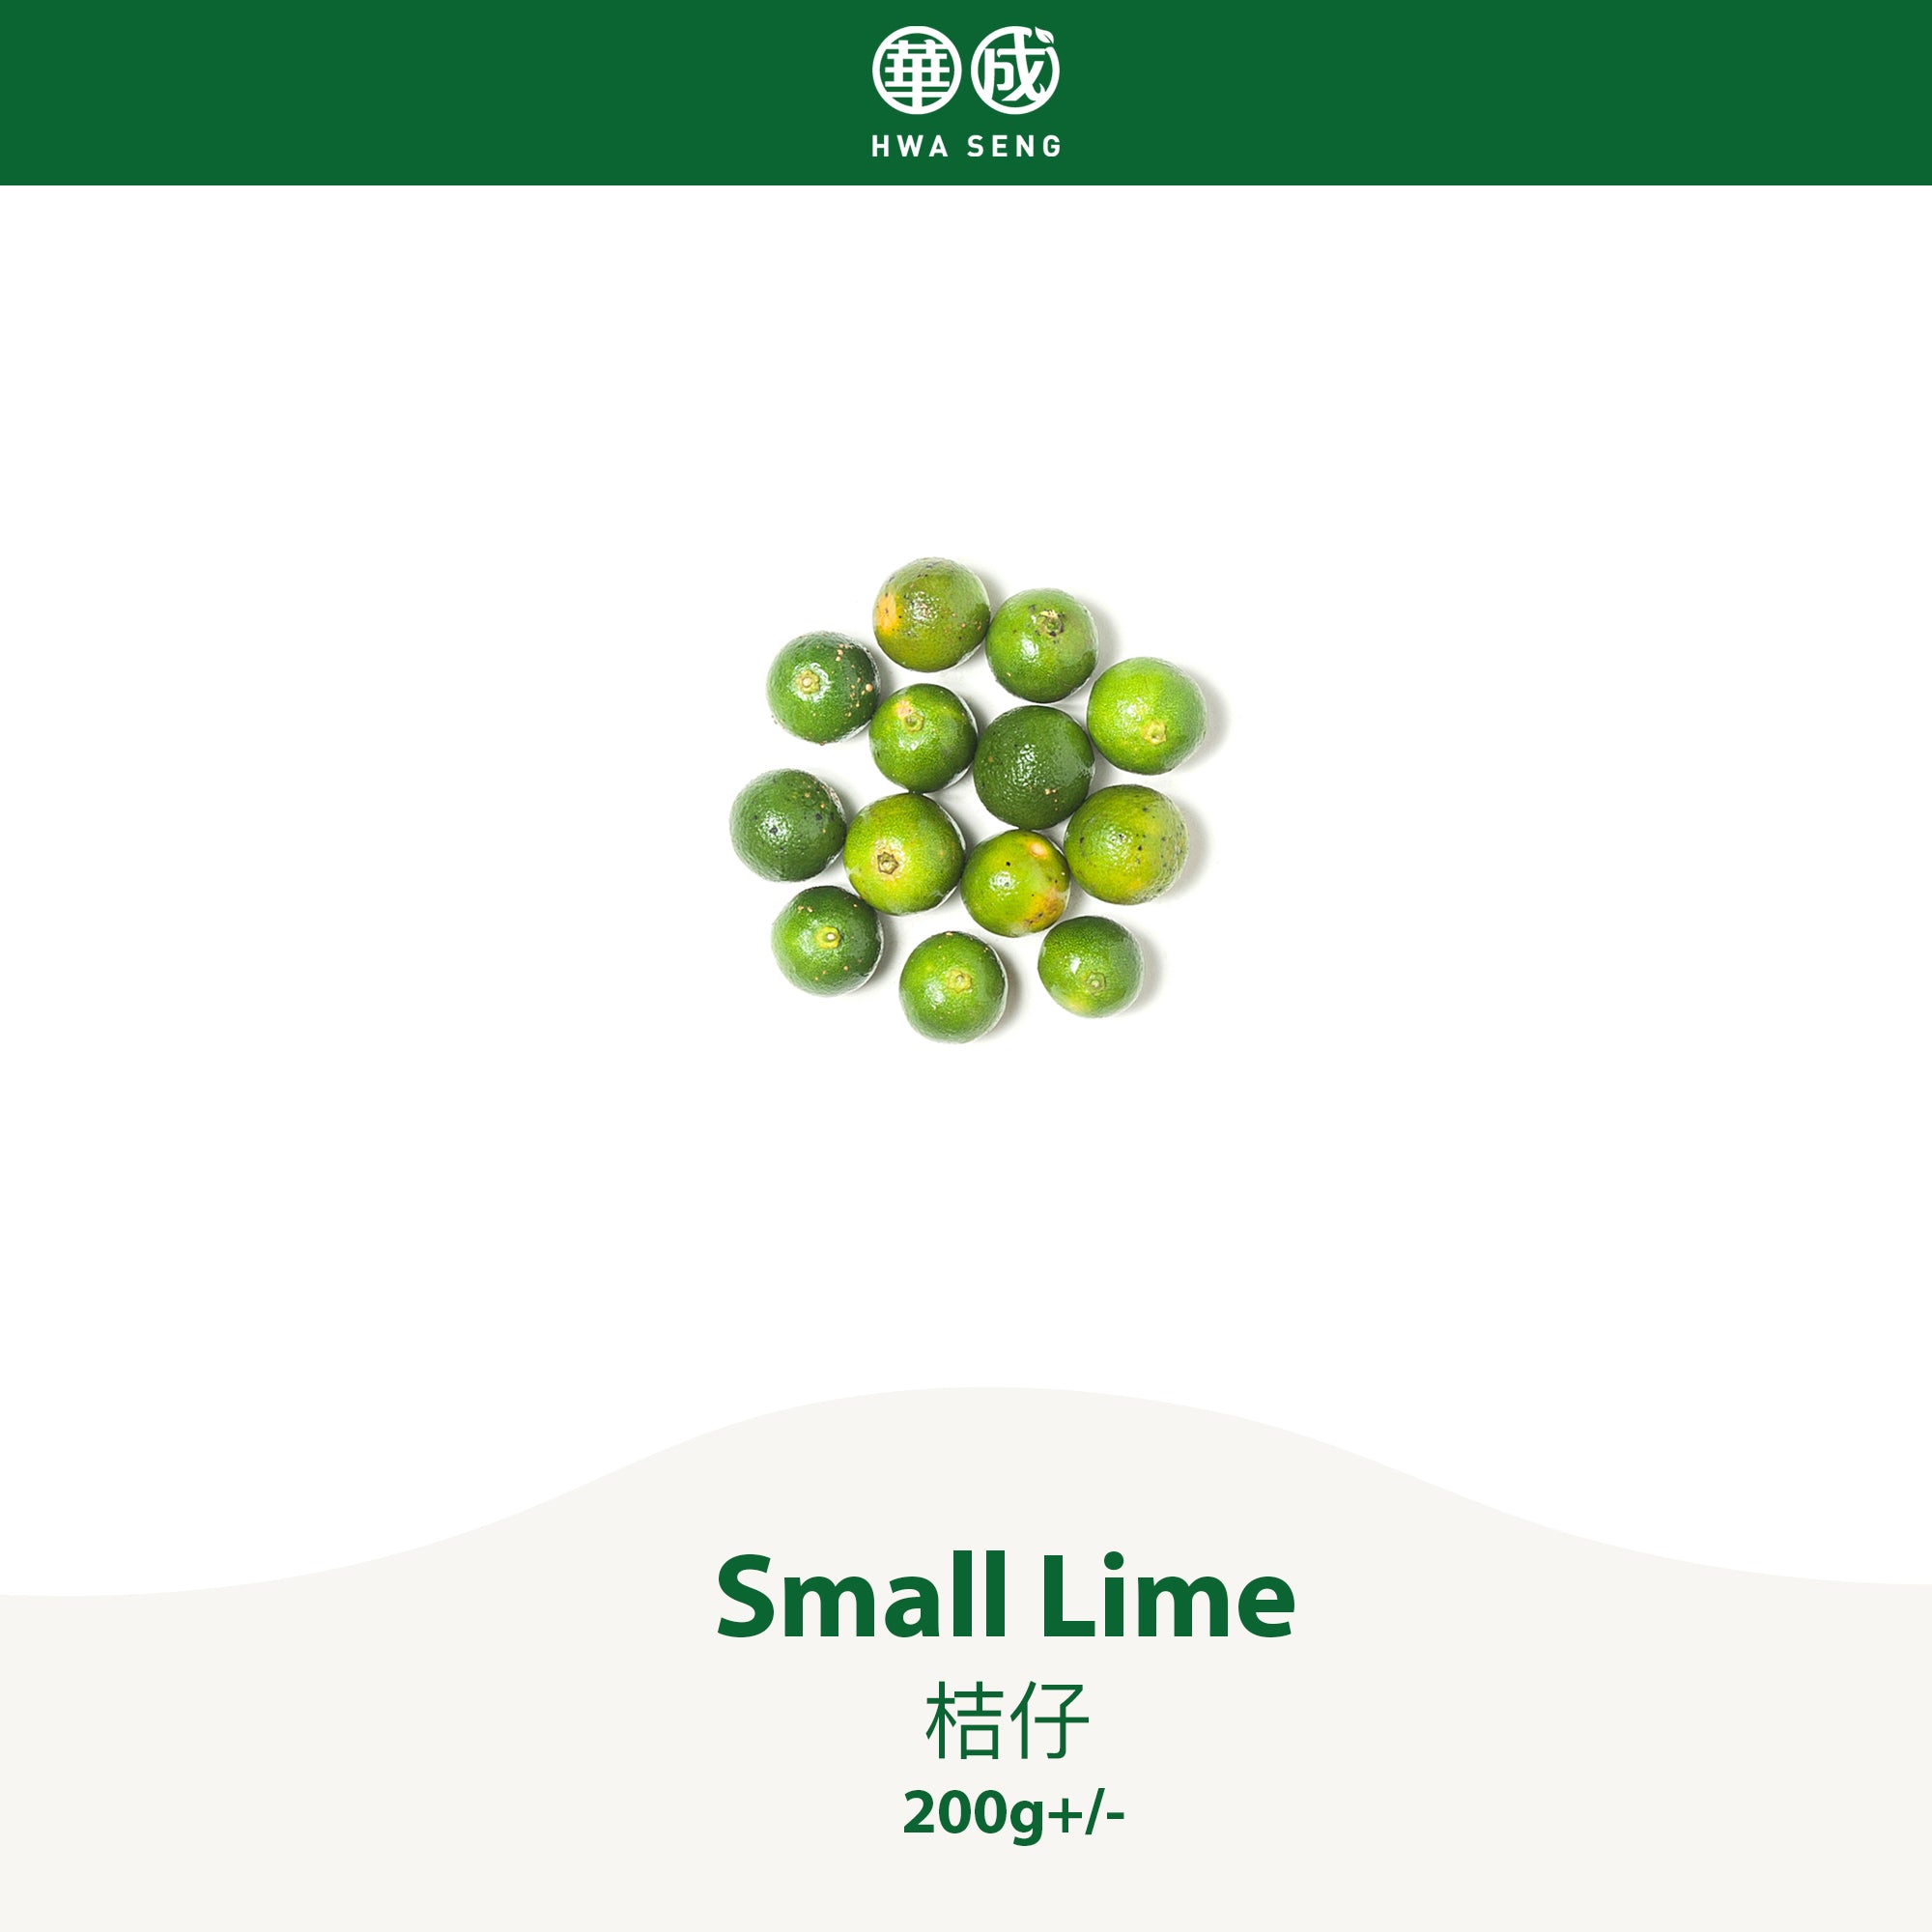 Small Lime 桔仔 200g+/-